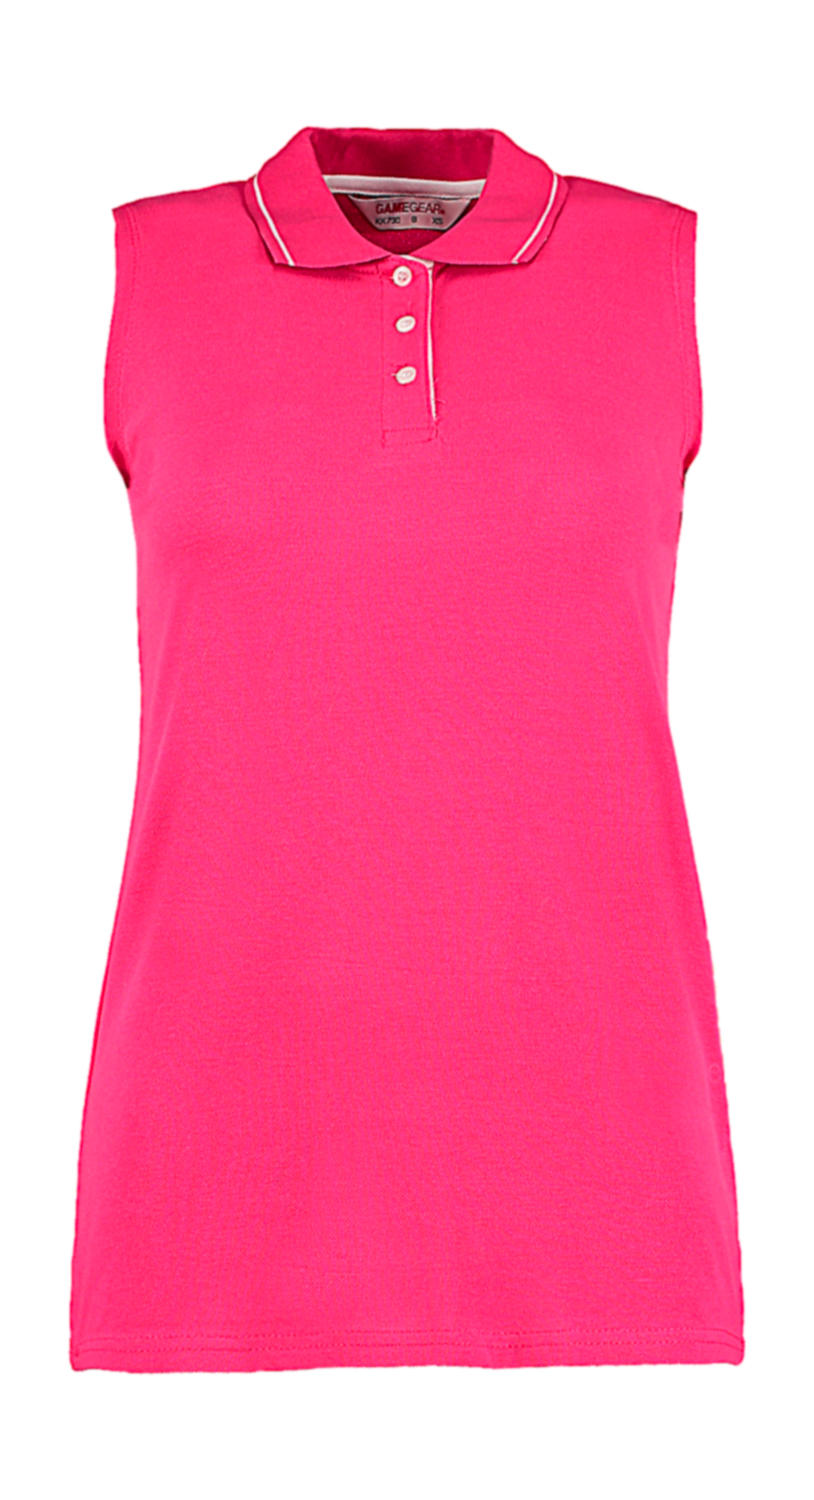  Womens Classic Fit Sleeveless Polo in Farbe Raspberry/White